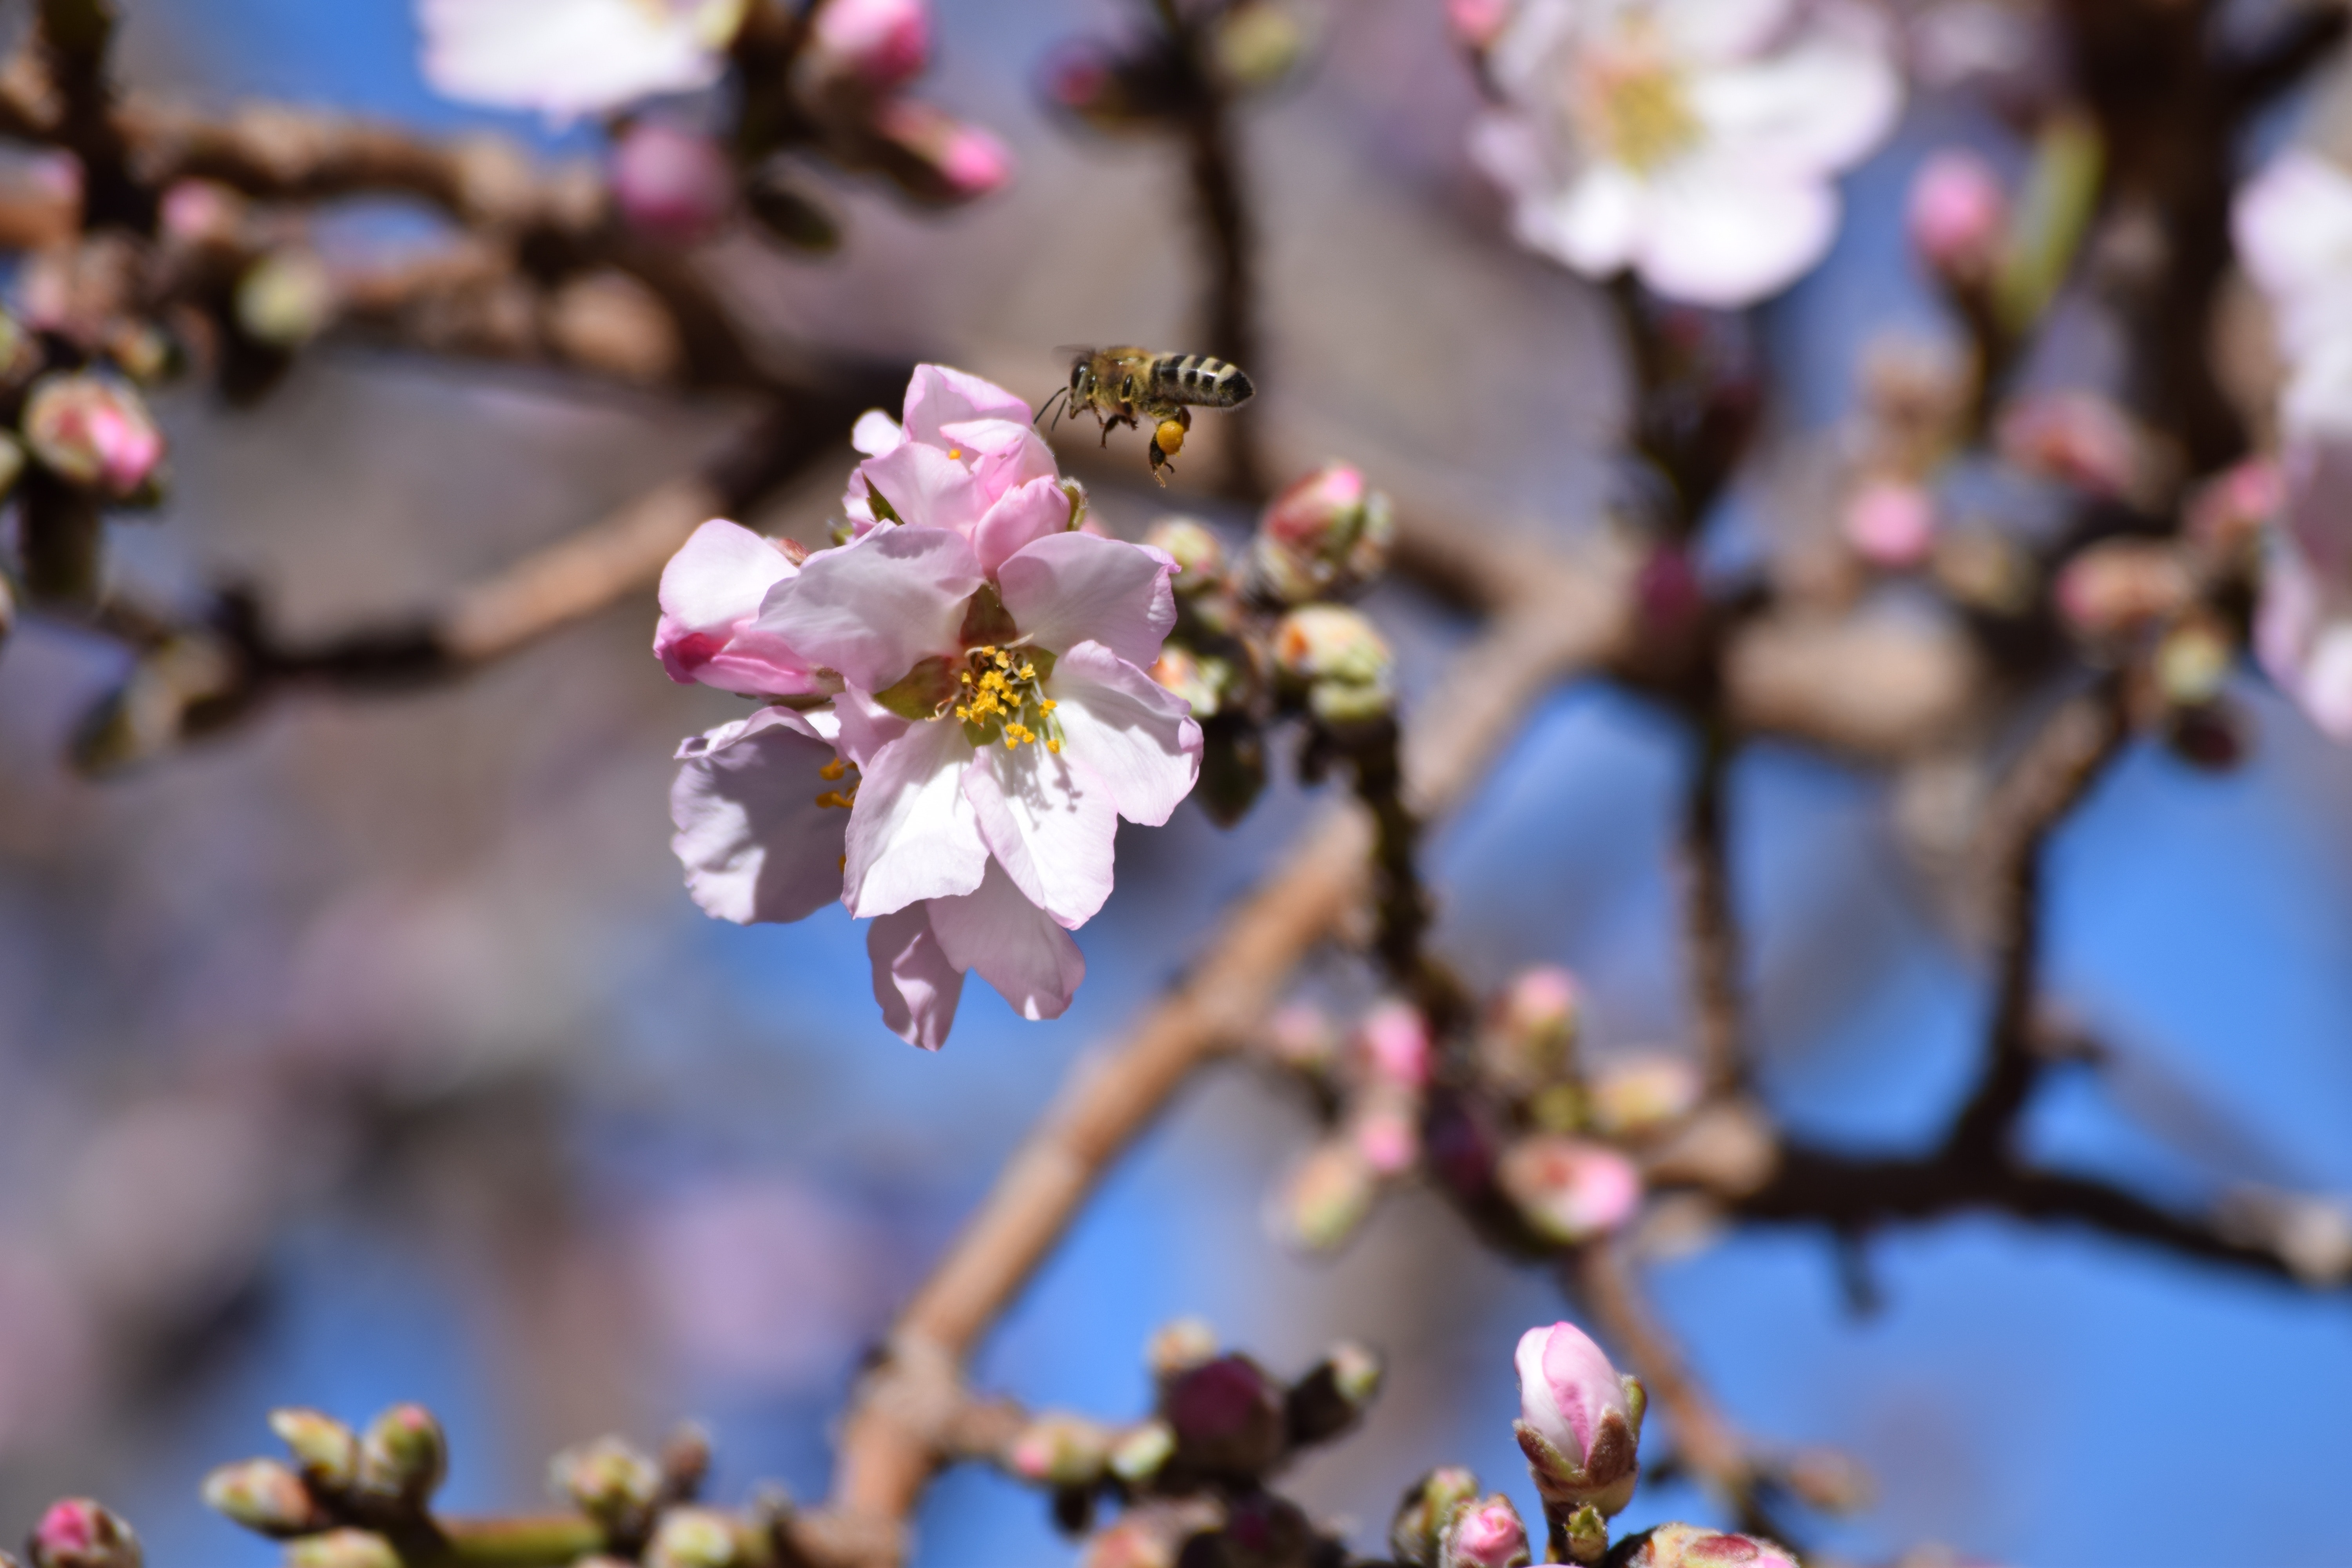 cherry blossom flower with a bee flying around